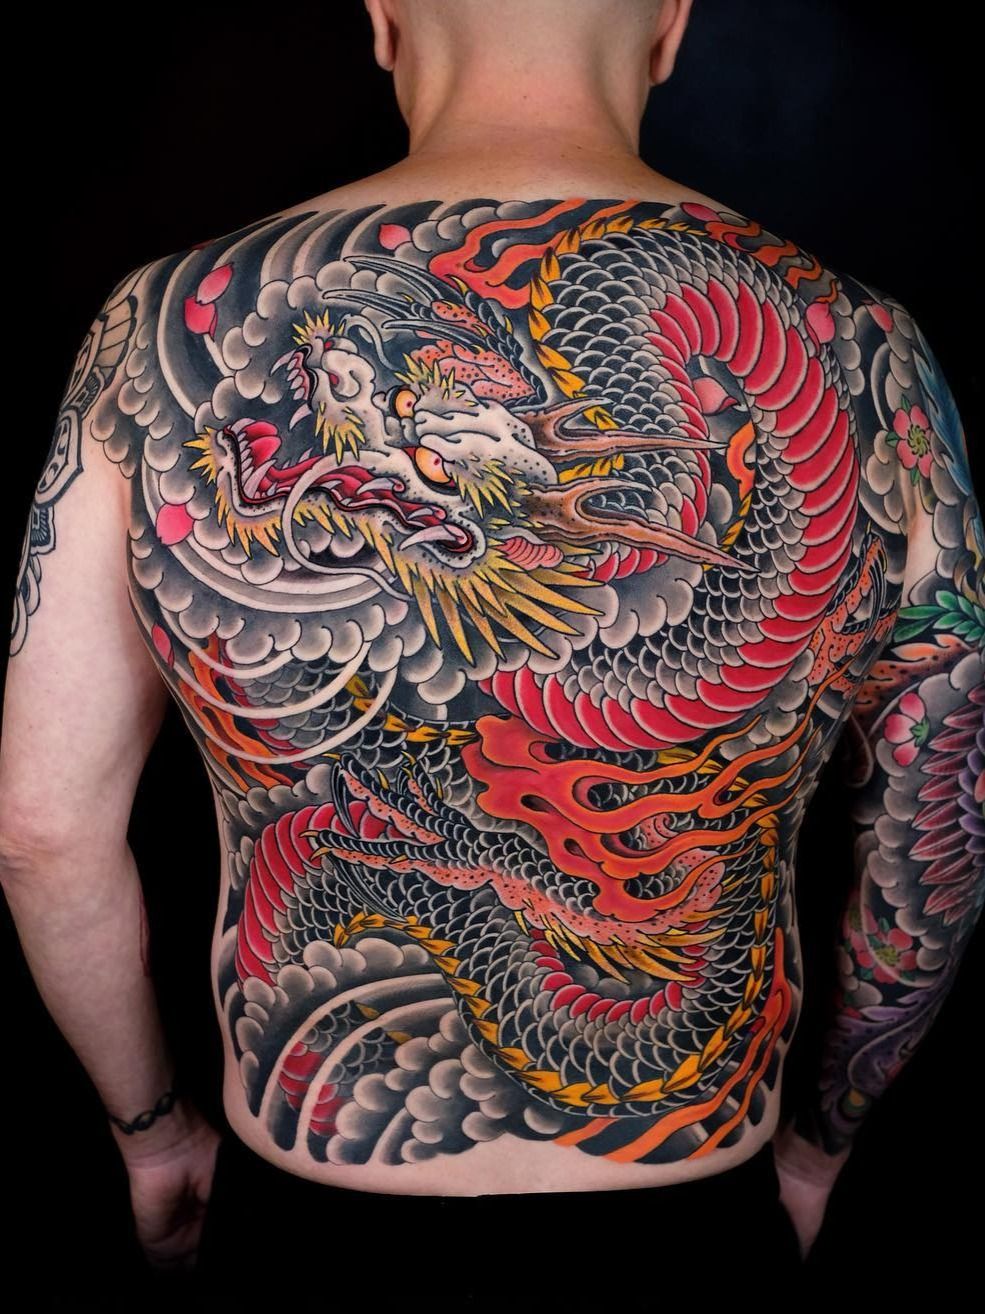 10 Stunning Korean Tattoo Designs for Your Next Ink